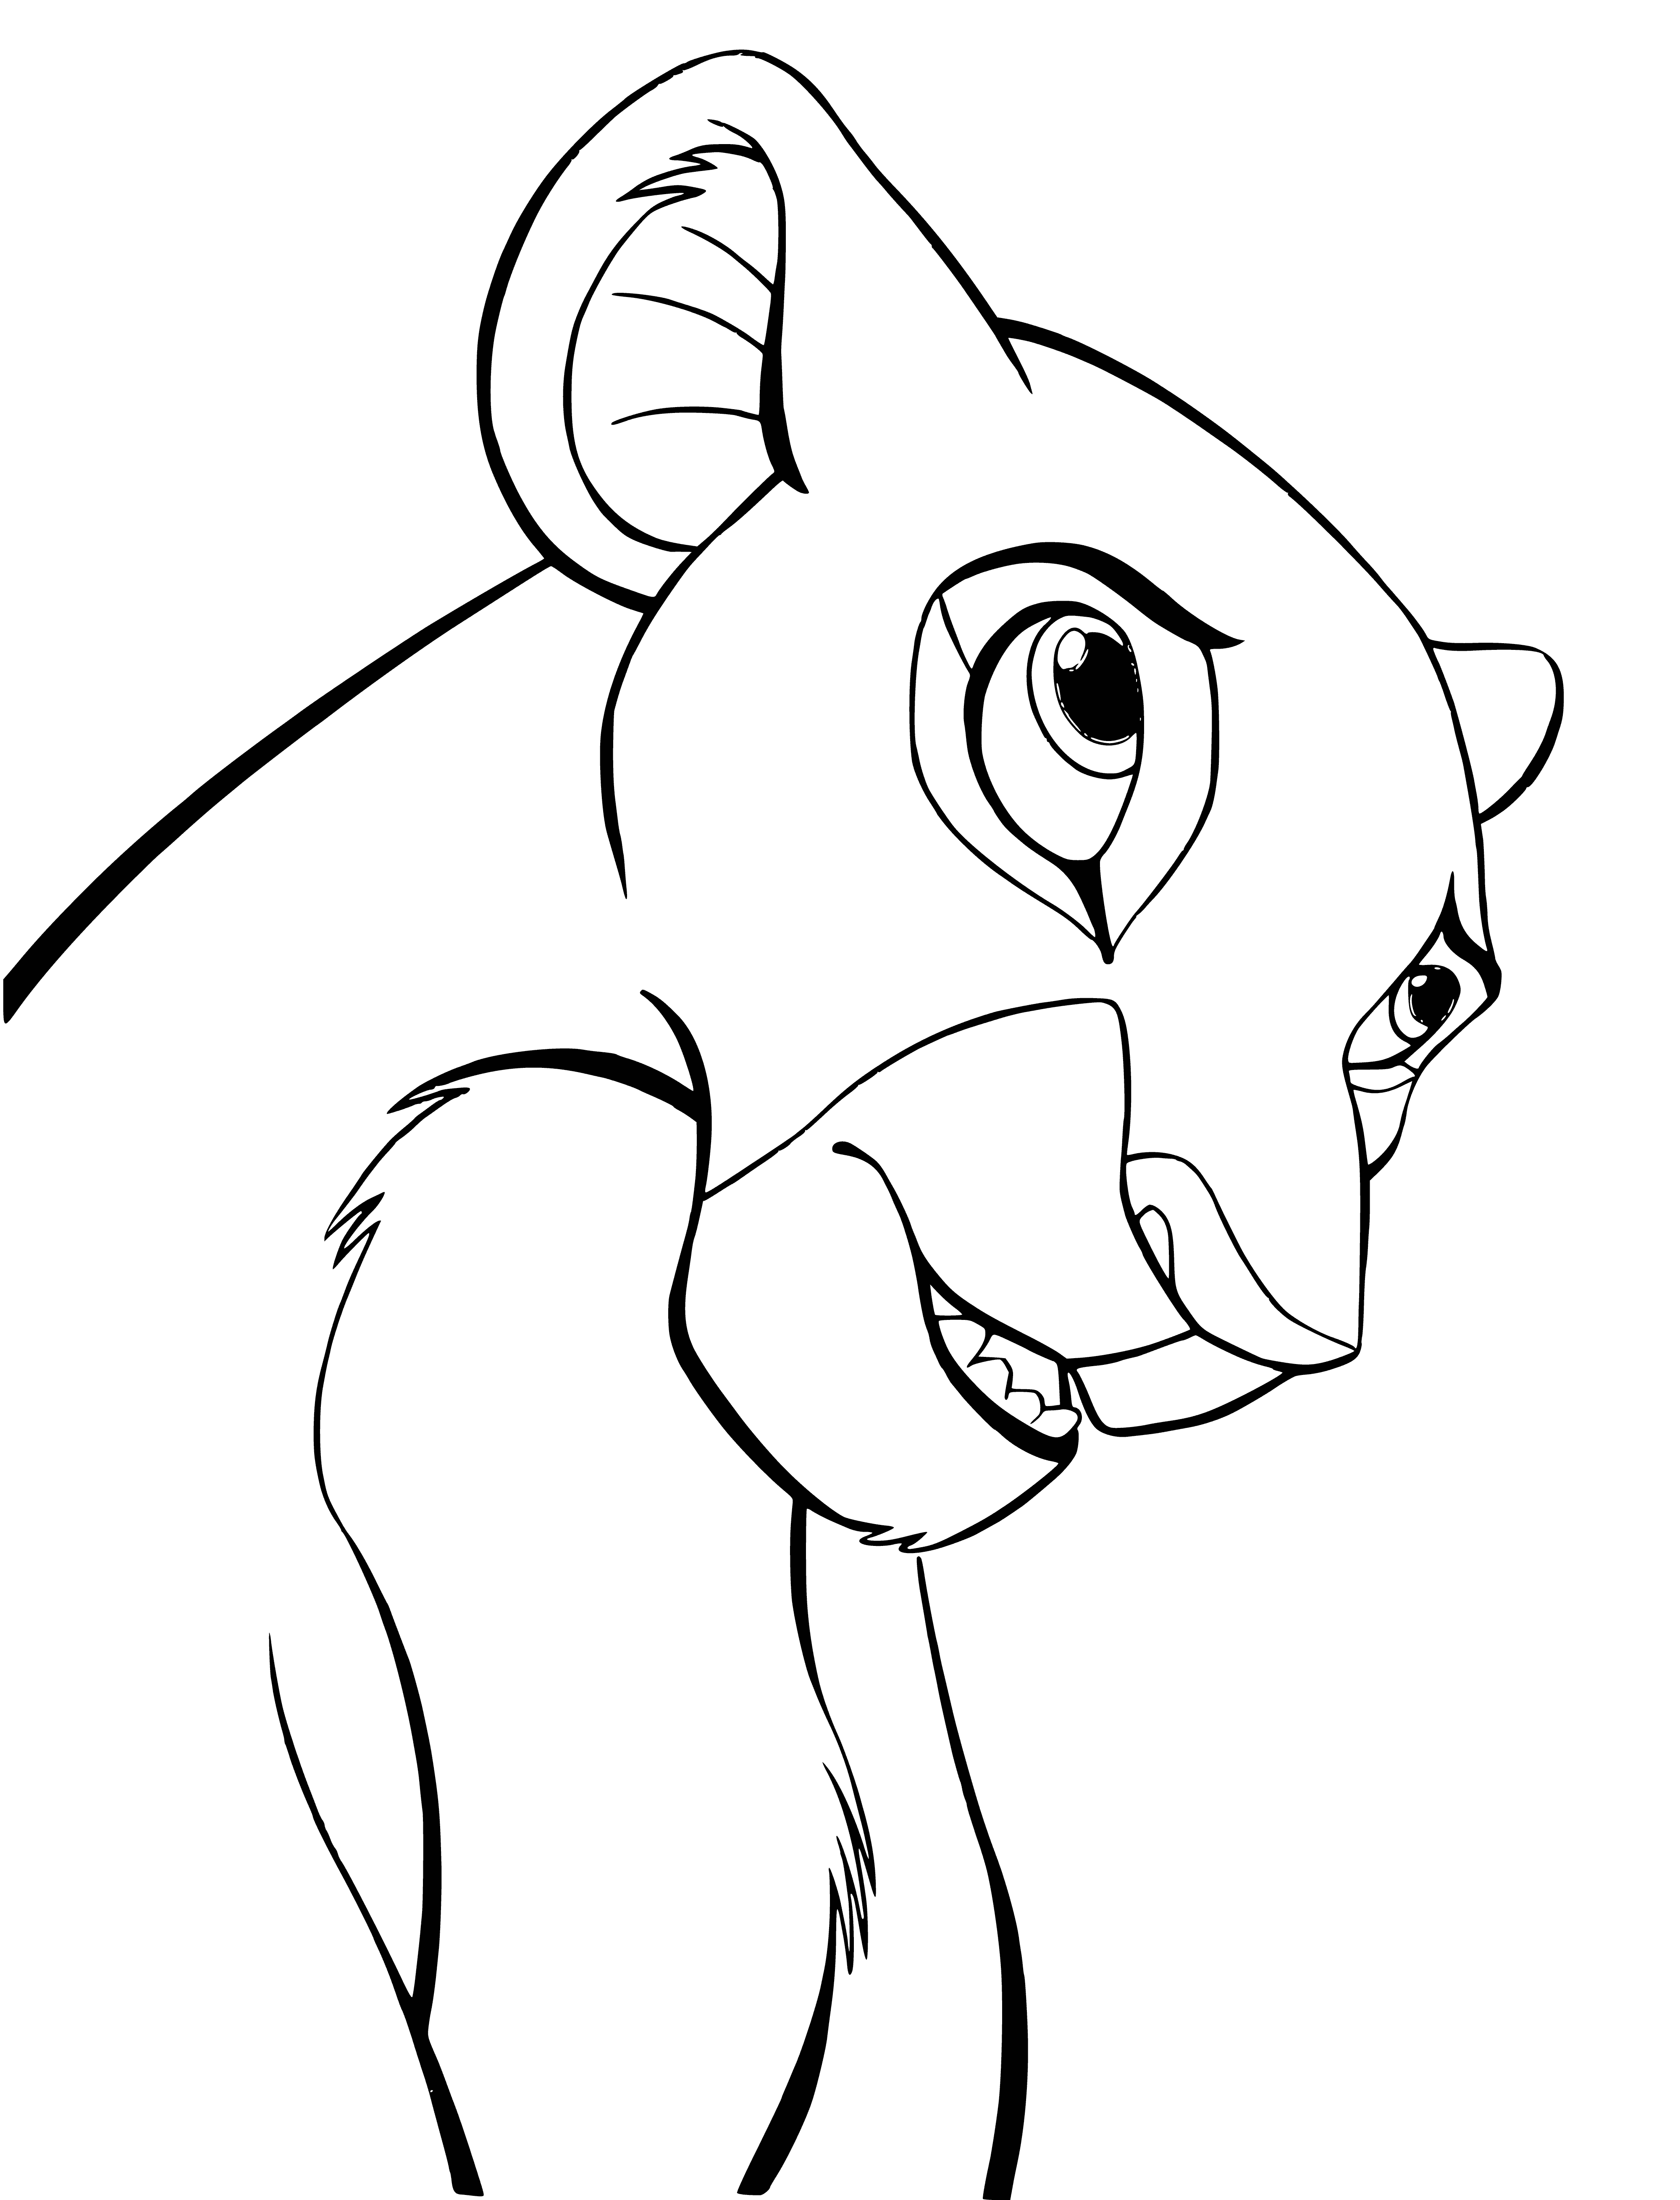 Lioness Nala coloring page